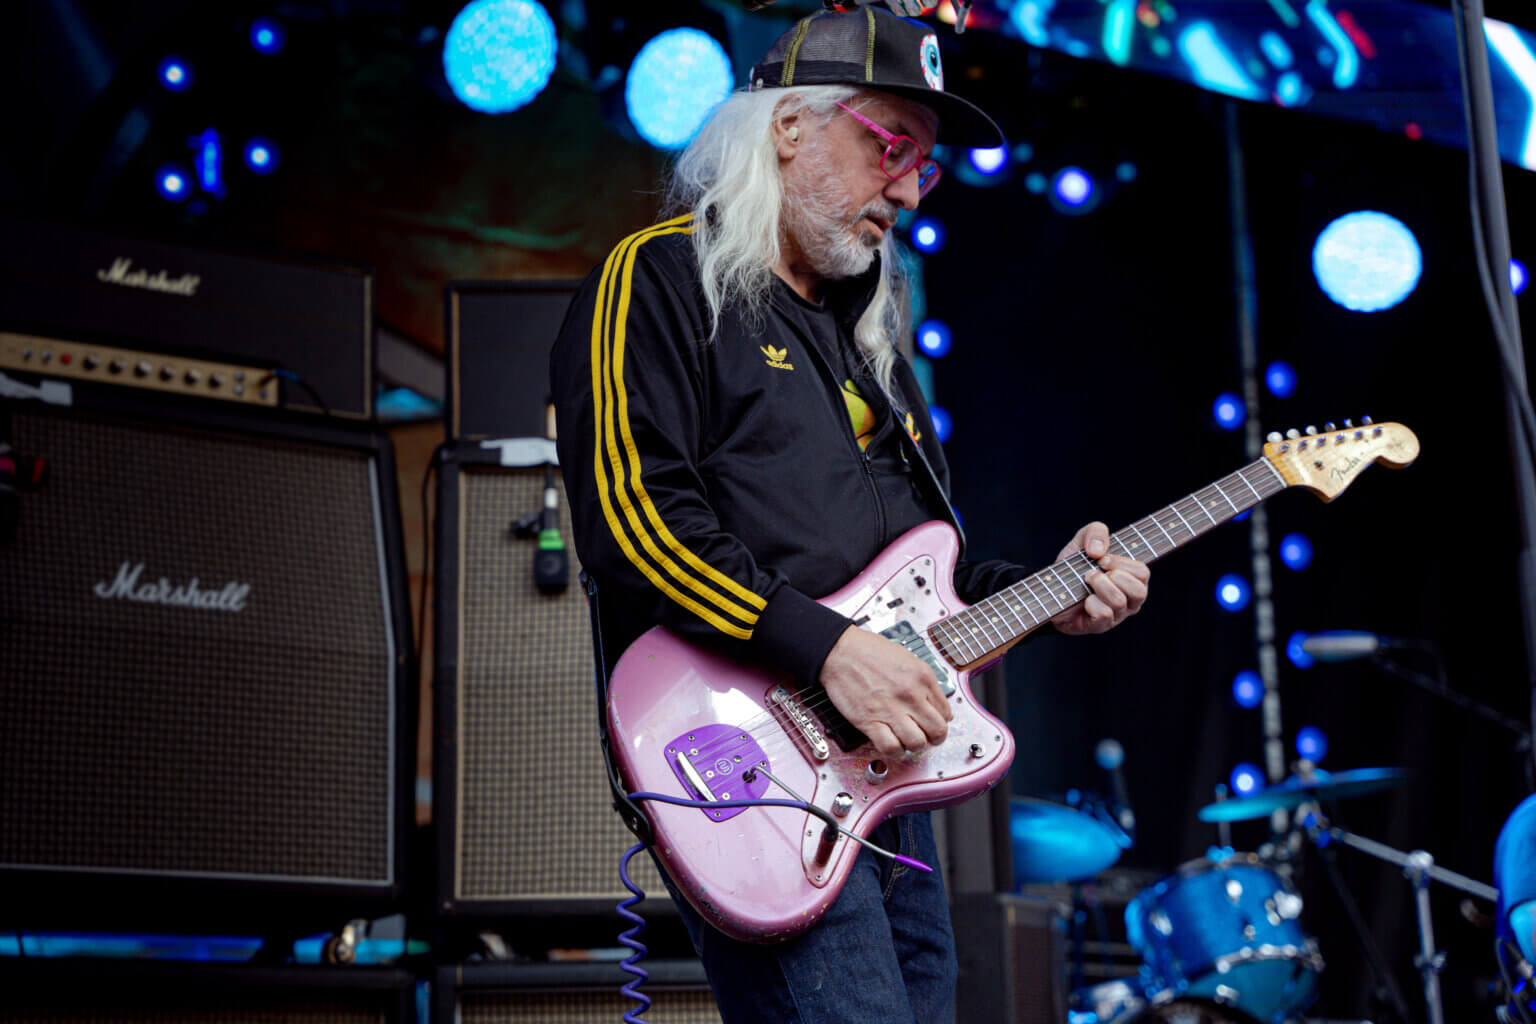 Treefort 11 Was an Exciting Discovery Wonderland. Read Leslie Ken Chu's review of the 2023 edition featuring, Dinosaur Jr, DEBBY FRIDAY